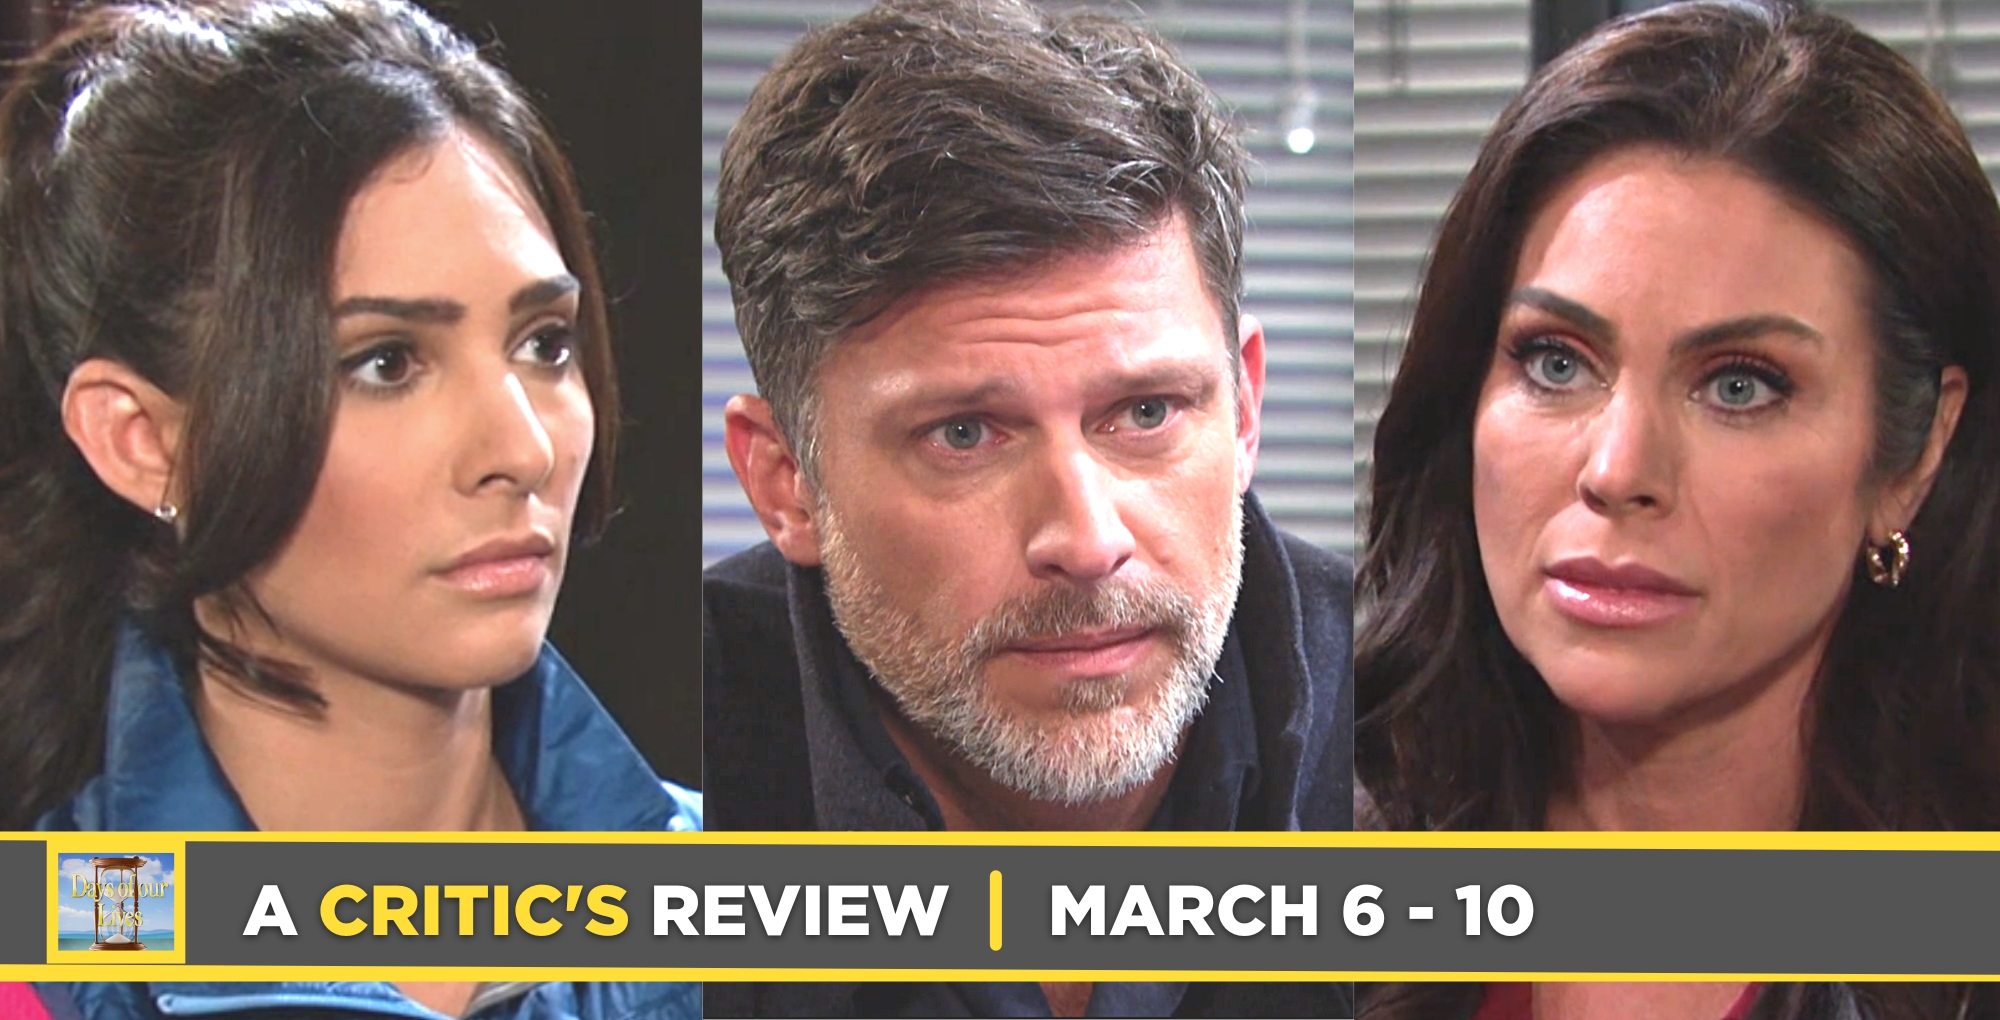 days of our lives critic's review for march 6 – march 10, 2023, three images gabi, eric, and chloe